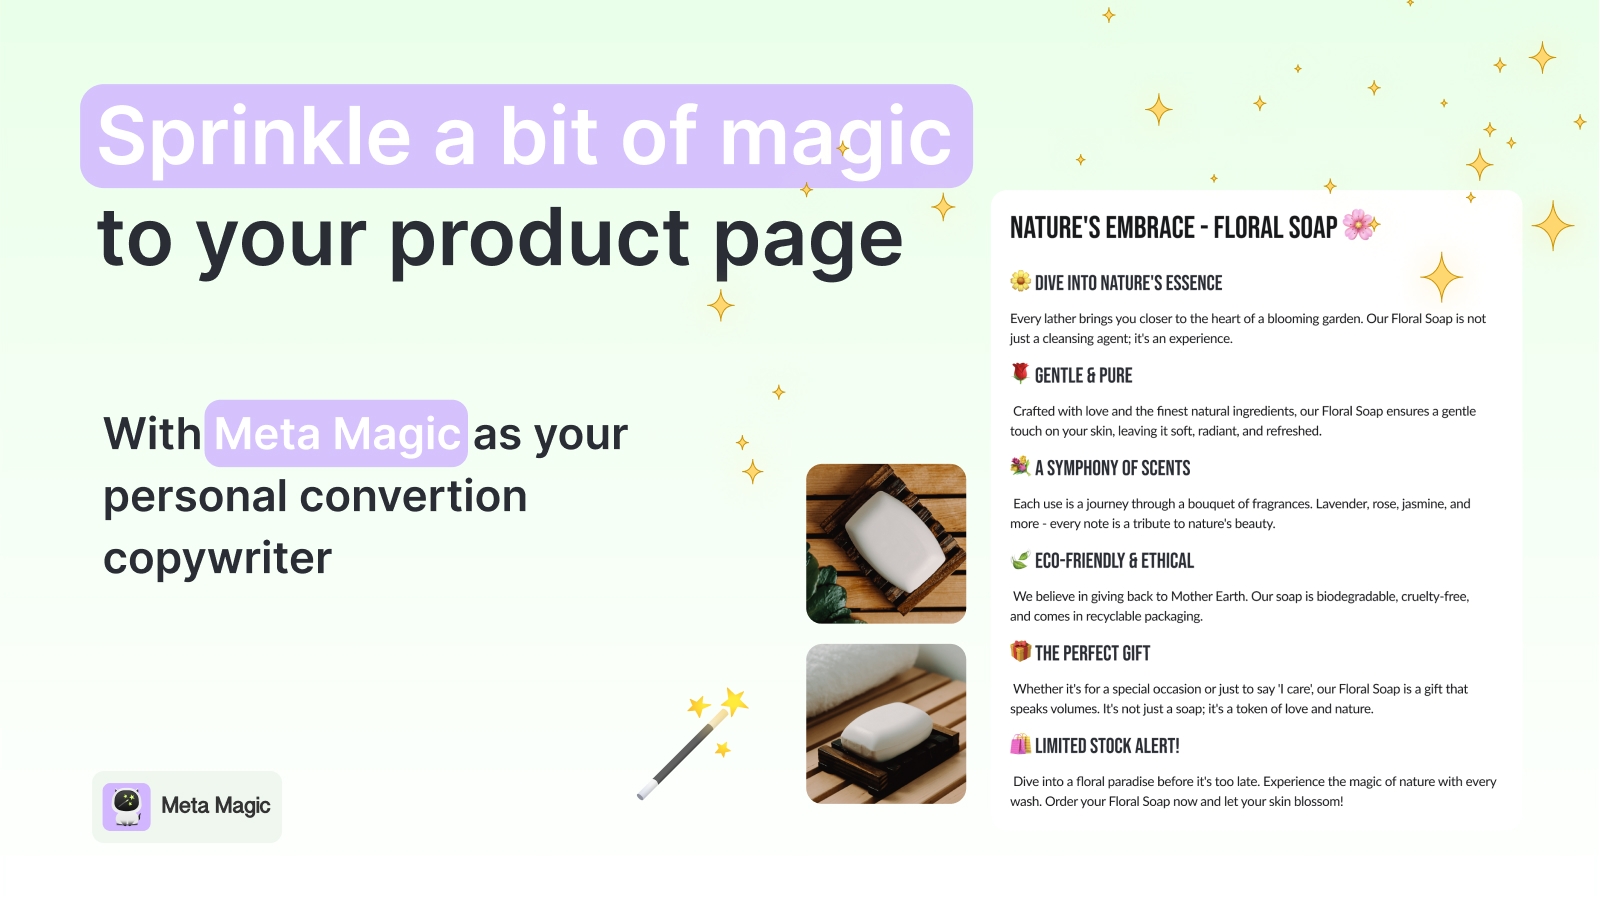 Sprinkle a bit of magic to your product page